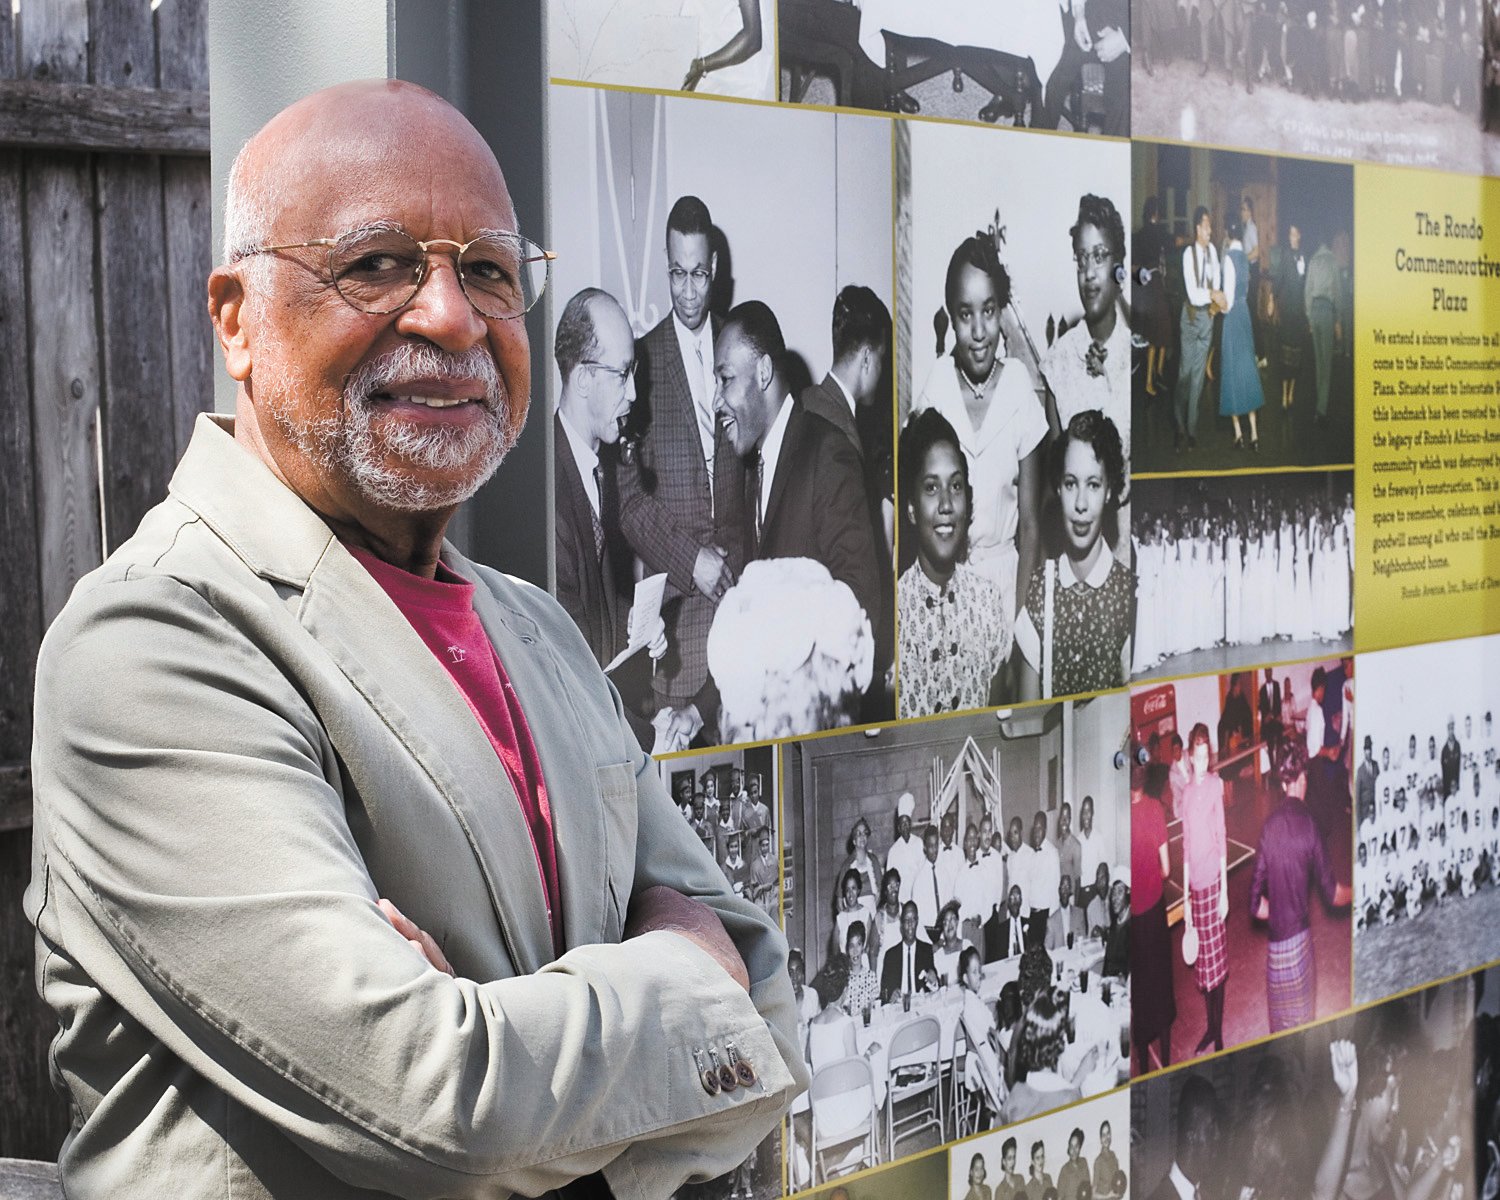 Marvin Roger Anderson at the Rondo Commemorative Plaza (on the corner of St. Anthony and Fisk avenues). (Photos by Margie O’Loughlin)